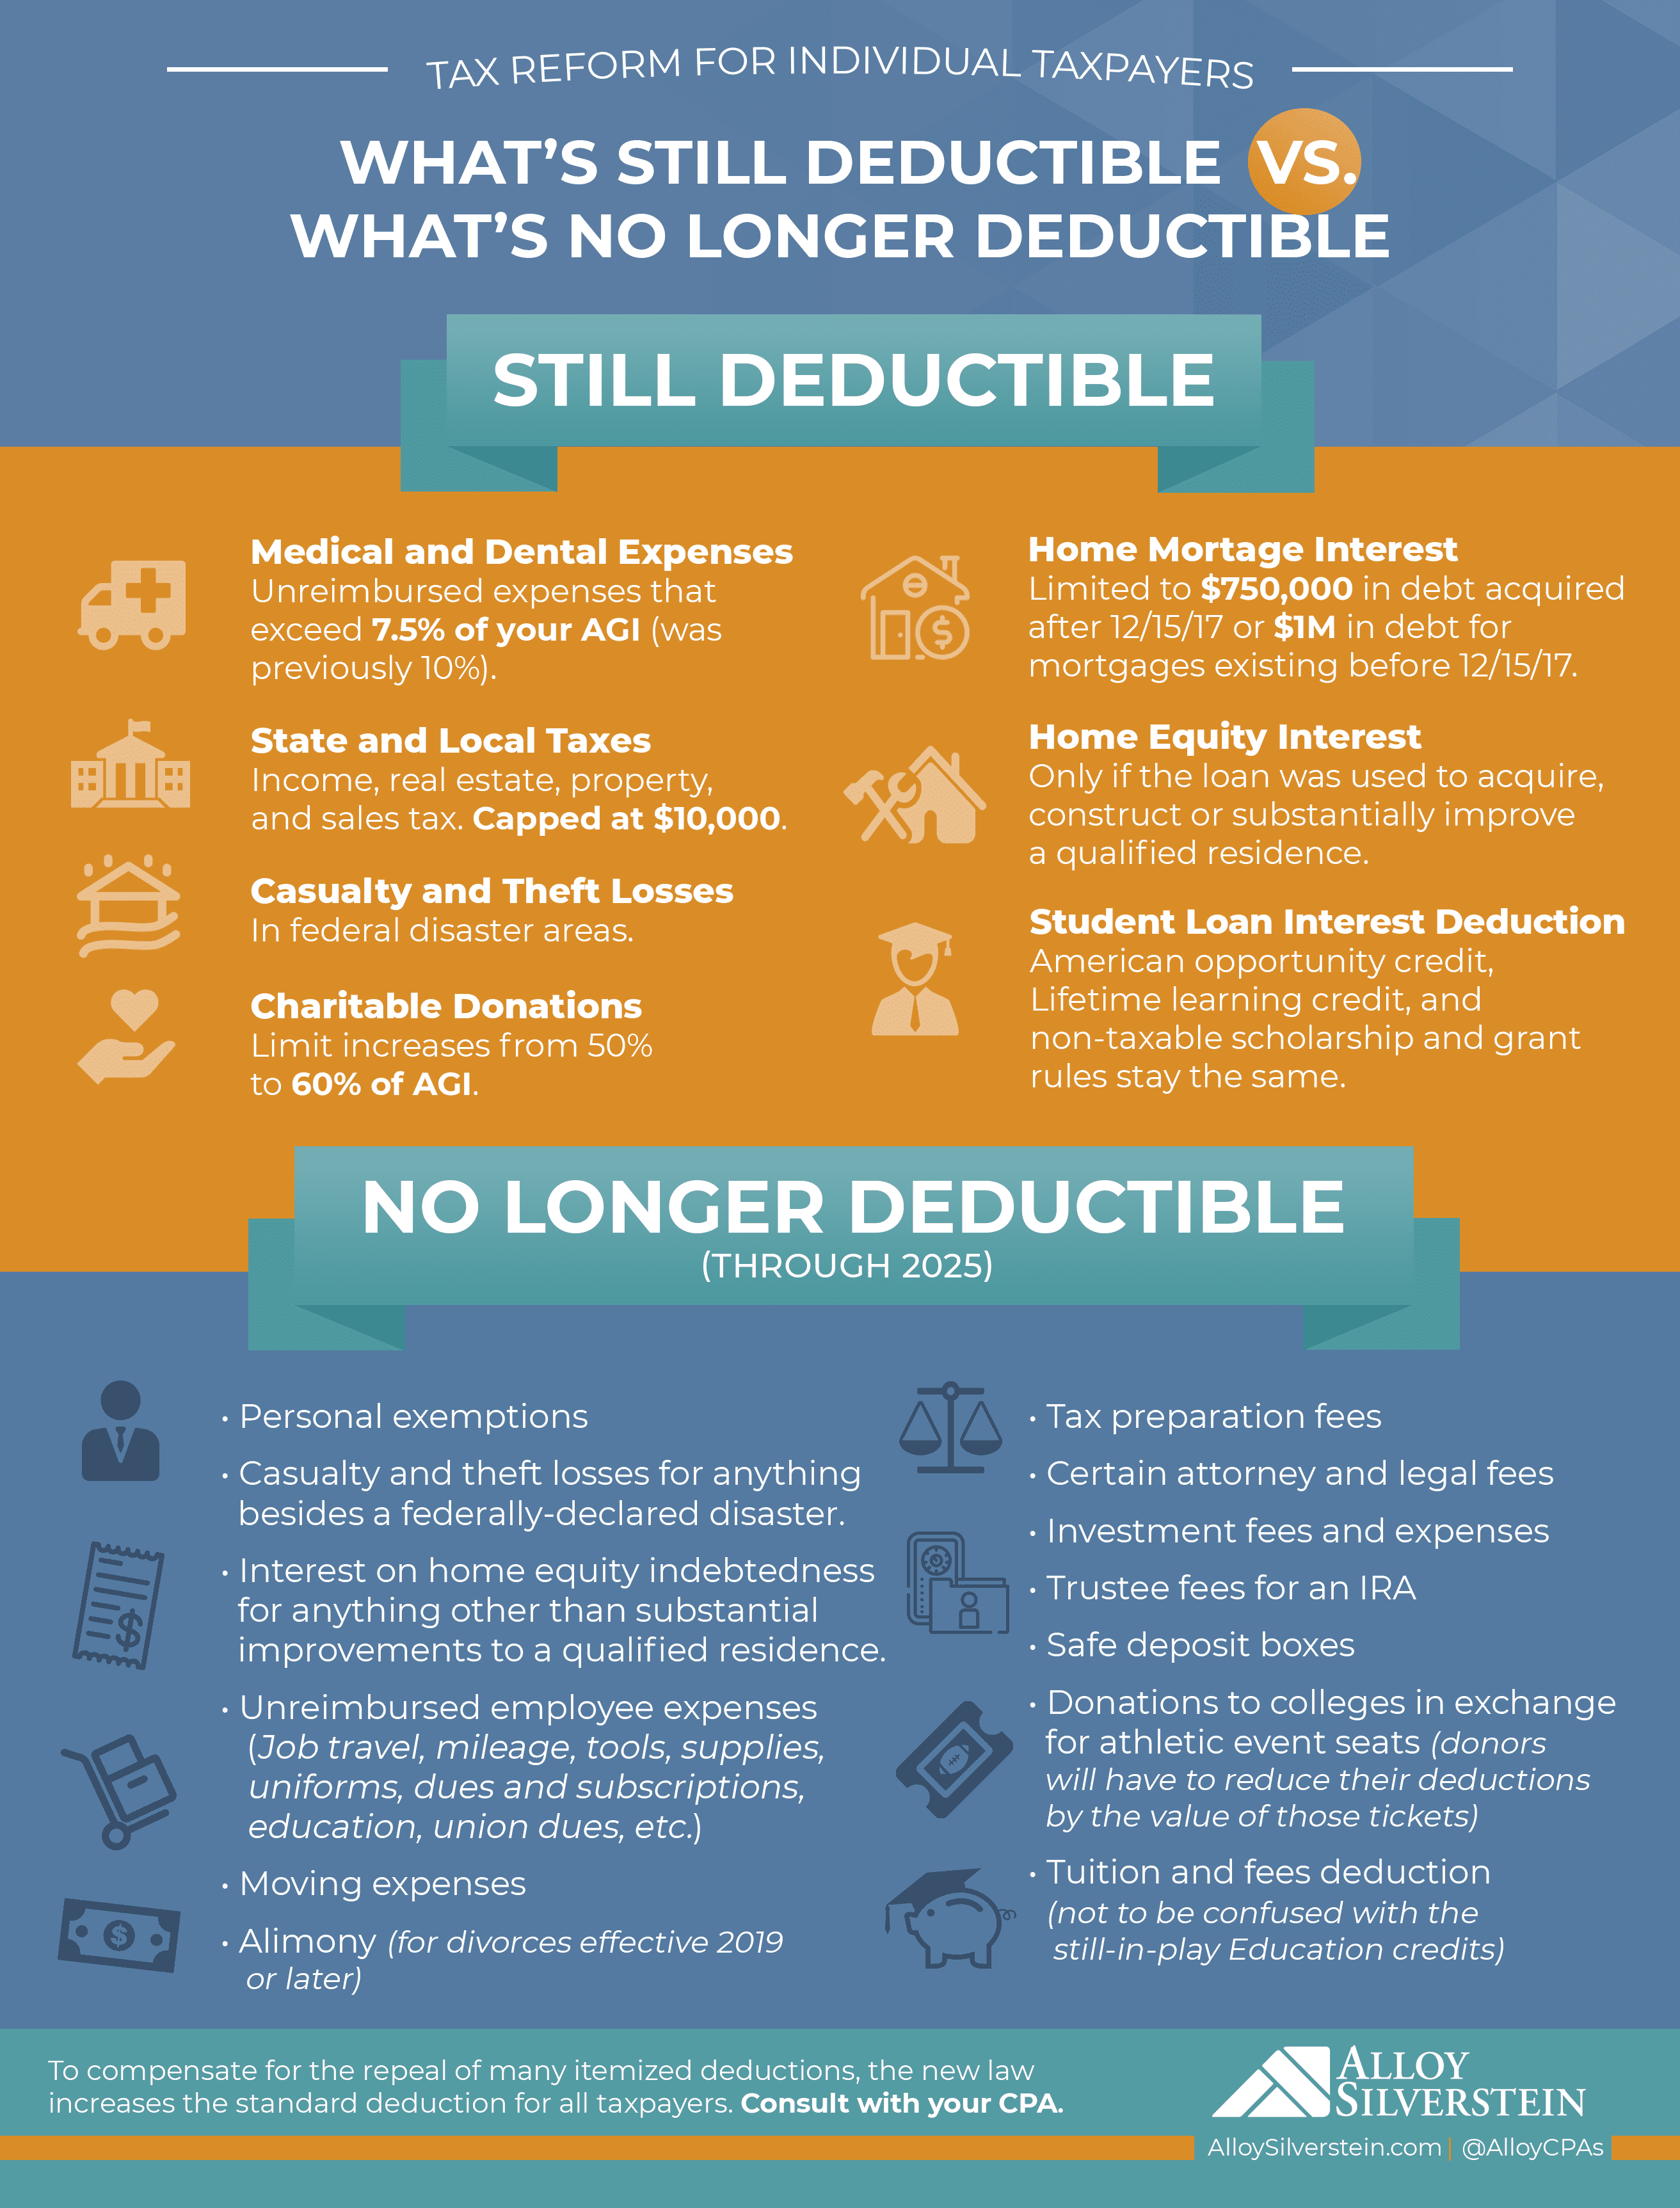 tax-deductions-the-new-rules-infographic-alloy-silverstein